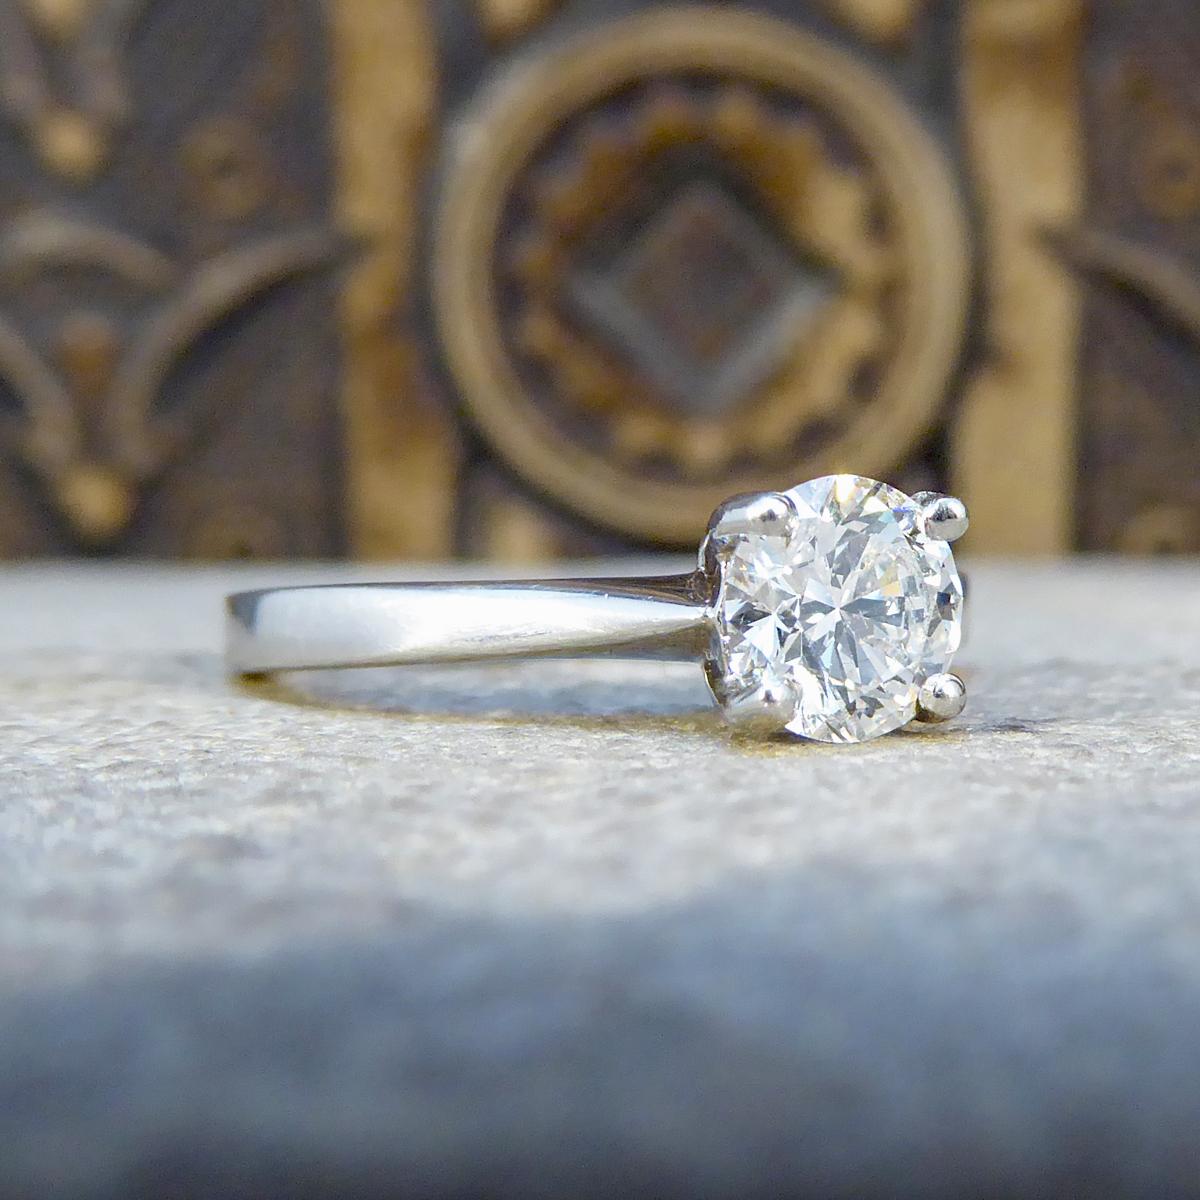 This beautifully sparkly engagement ring holds an Round cut Diamond weighing 0.70ct and is set in Platinum in an four claw setting. A classic solitaire ring with style that stands the test of time, the perfect engagement ring.

Diamond Details:
Cut: